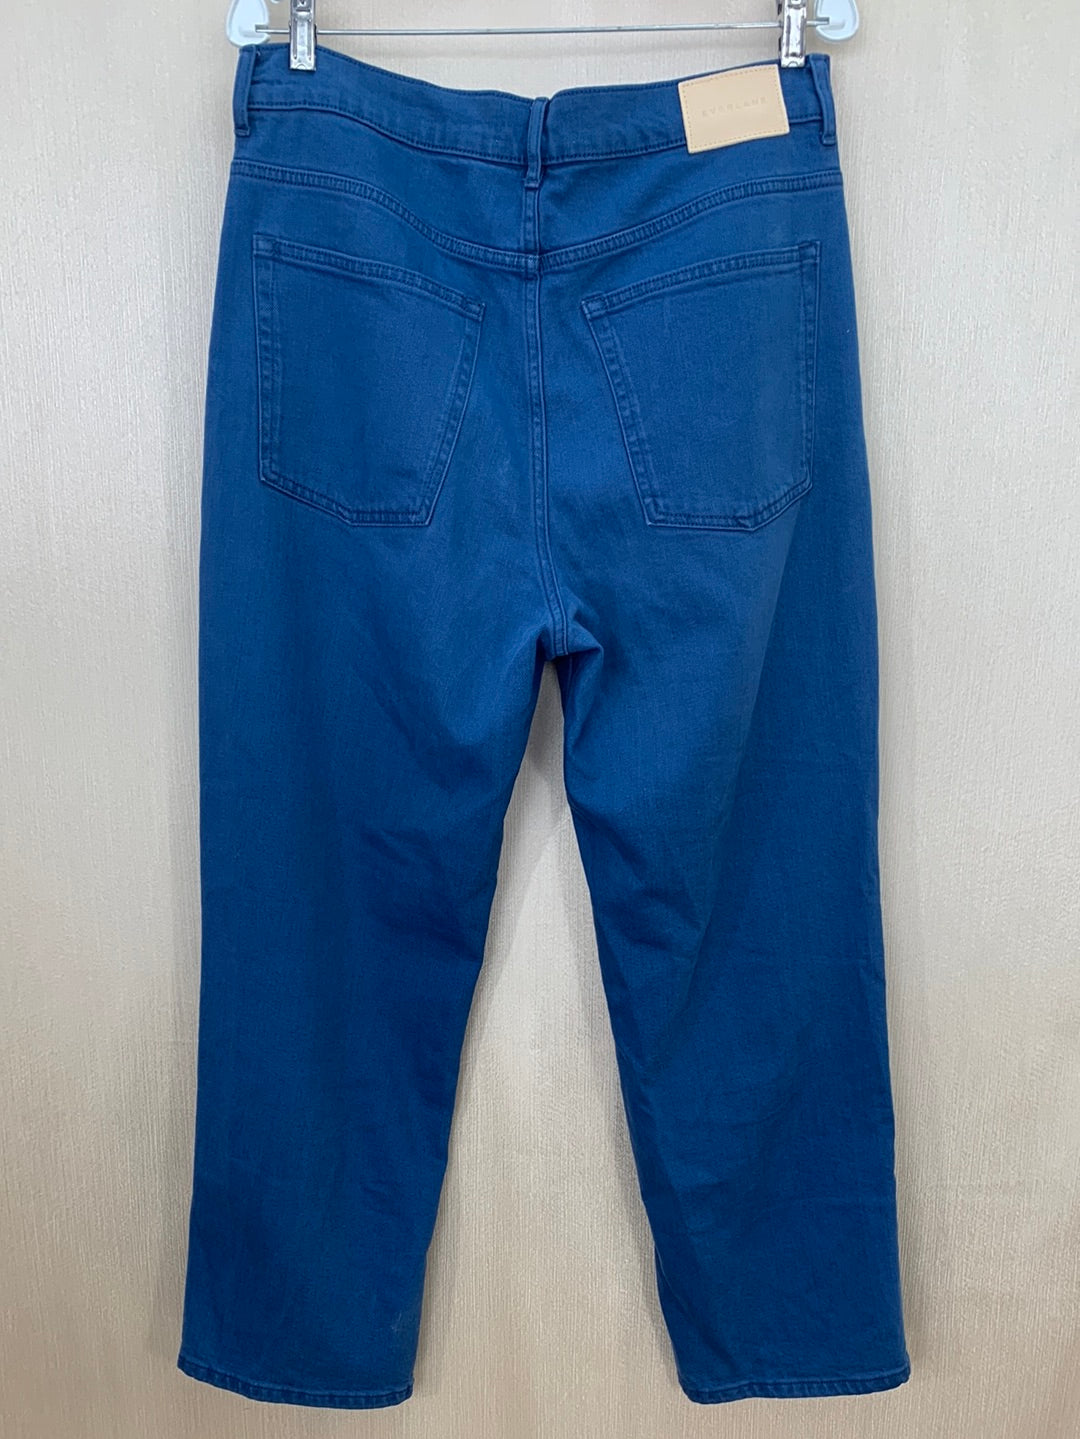 EVERLANE blue The Way High Jeans - 31